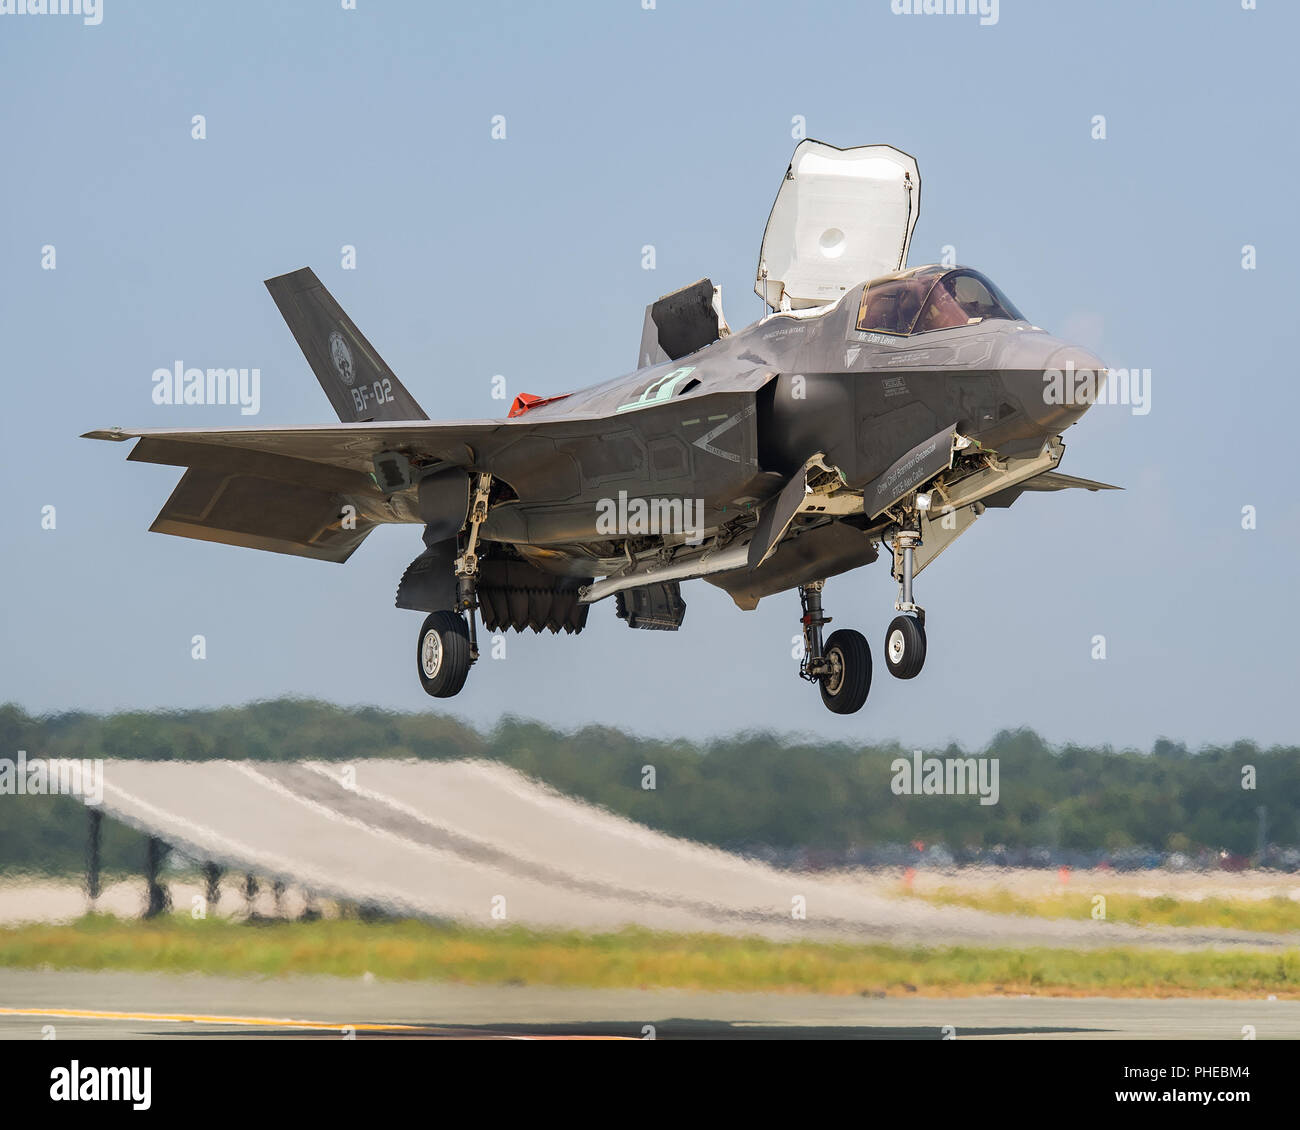 Royal Navy Cmdr. Nathan Gray and U.S. Marine Corps Maj. Michael Lippert, both F-35 Pax River ITF test pilots, conduct ski jumps and field carrier landing practices with F-35Bs on Aug. 28, 2018, at NAS Patuxent River as part of the workups for the First of Class Flight Trials aboard the HMS Queen Elizabeth.  Around 200 supporting staff from the ITF, including pilots, engineers, maintainers and data analysts, will take two F-35Bs test aircraft aboard HMS Queen Elizabeth this fall to evaluate the fifth-generation aircraft performance and integration with Royal Navy’s newest aircraft carrier. This Stock Photo